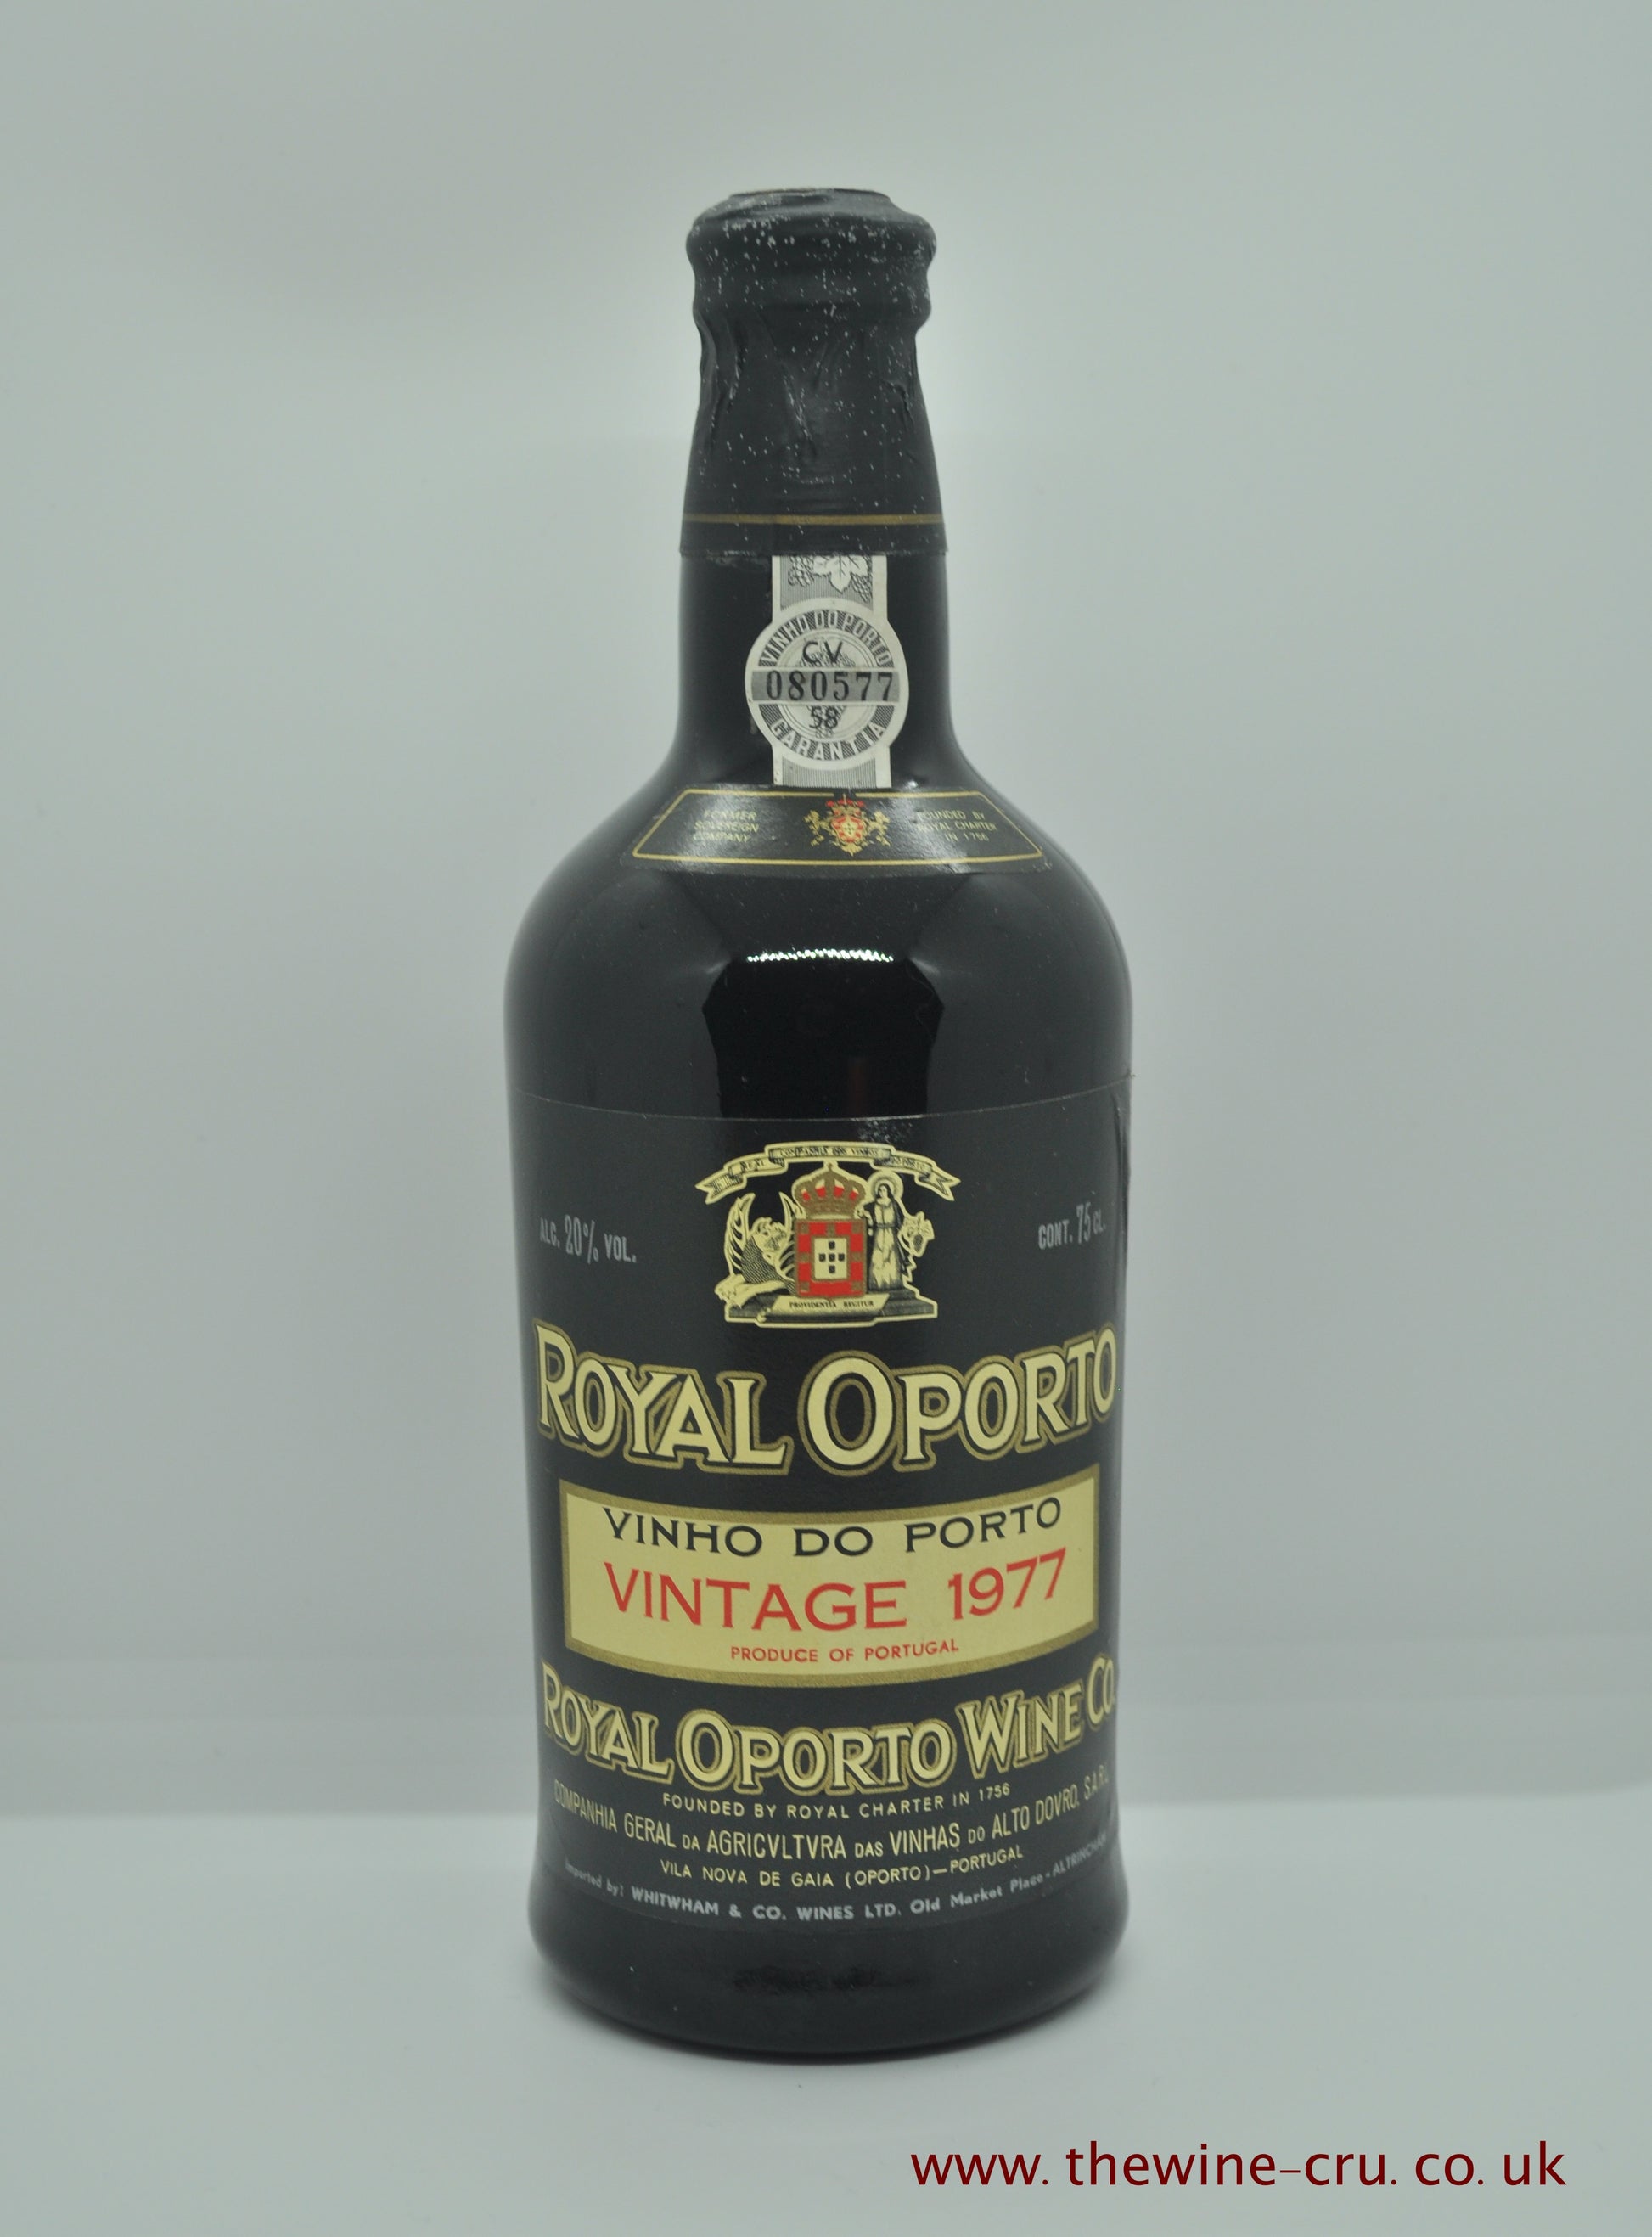 1977 vintage port wine. Royal Oporto Vintage Port 1977. Portugal. Immediate delivery. Free local delivery. Gift wrapping available.